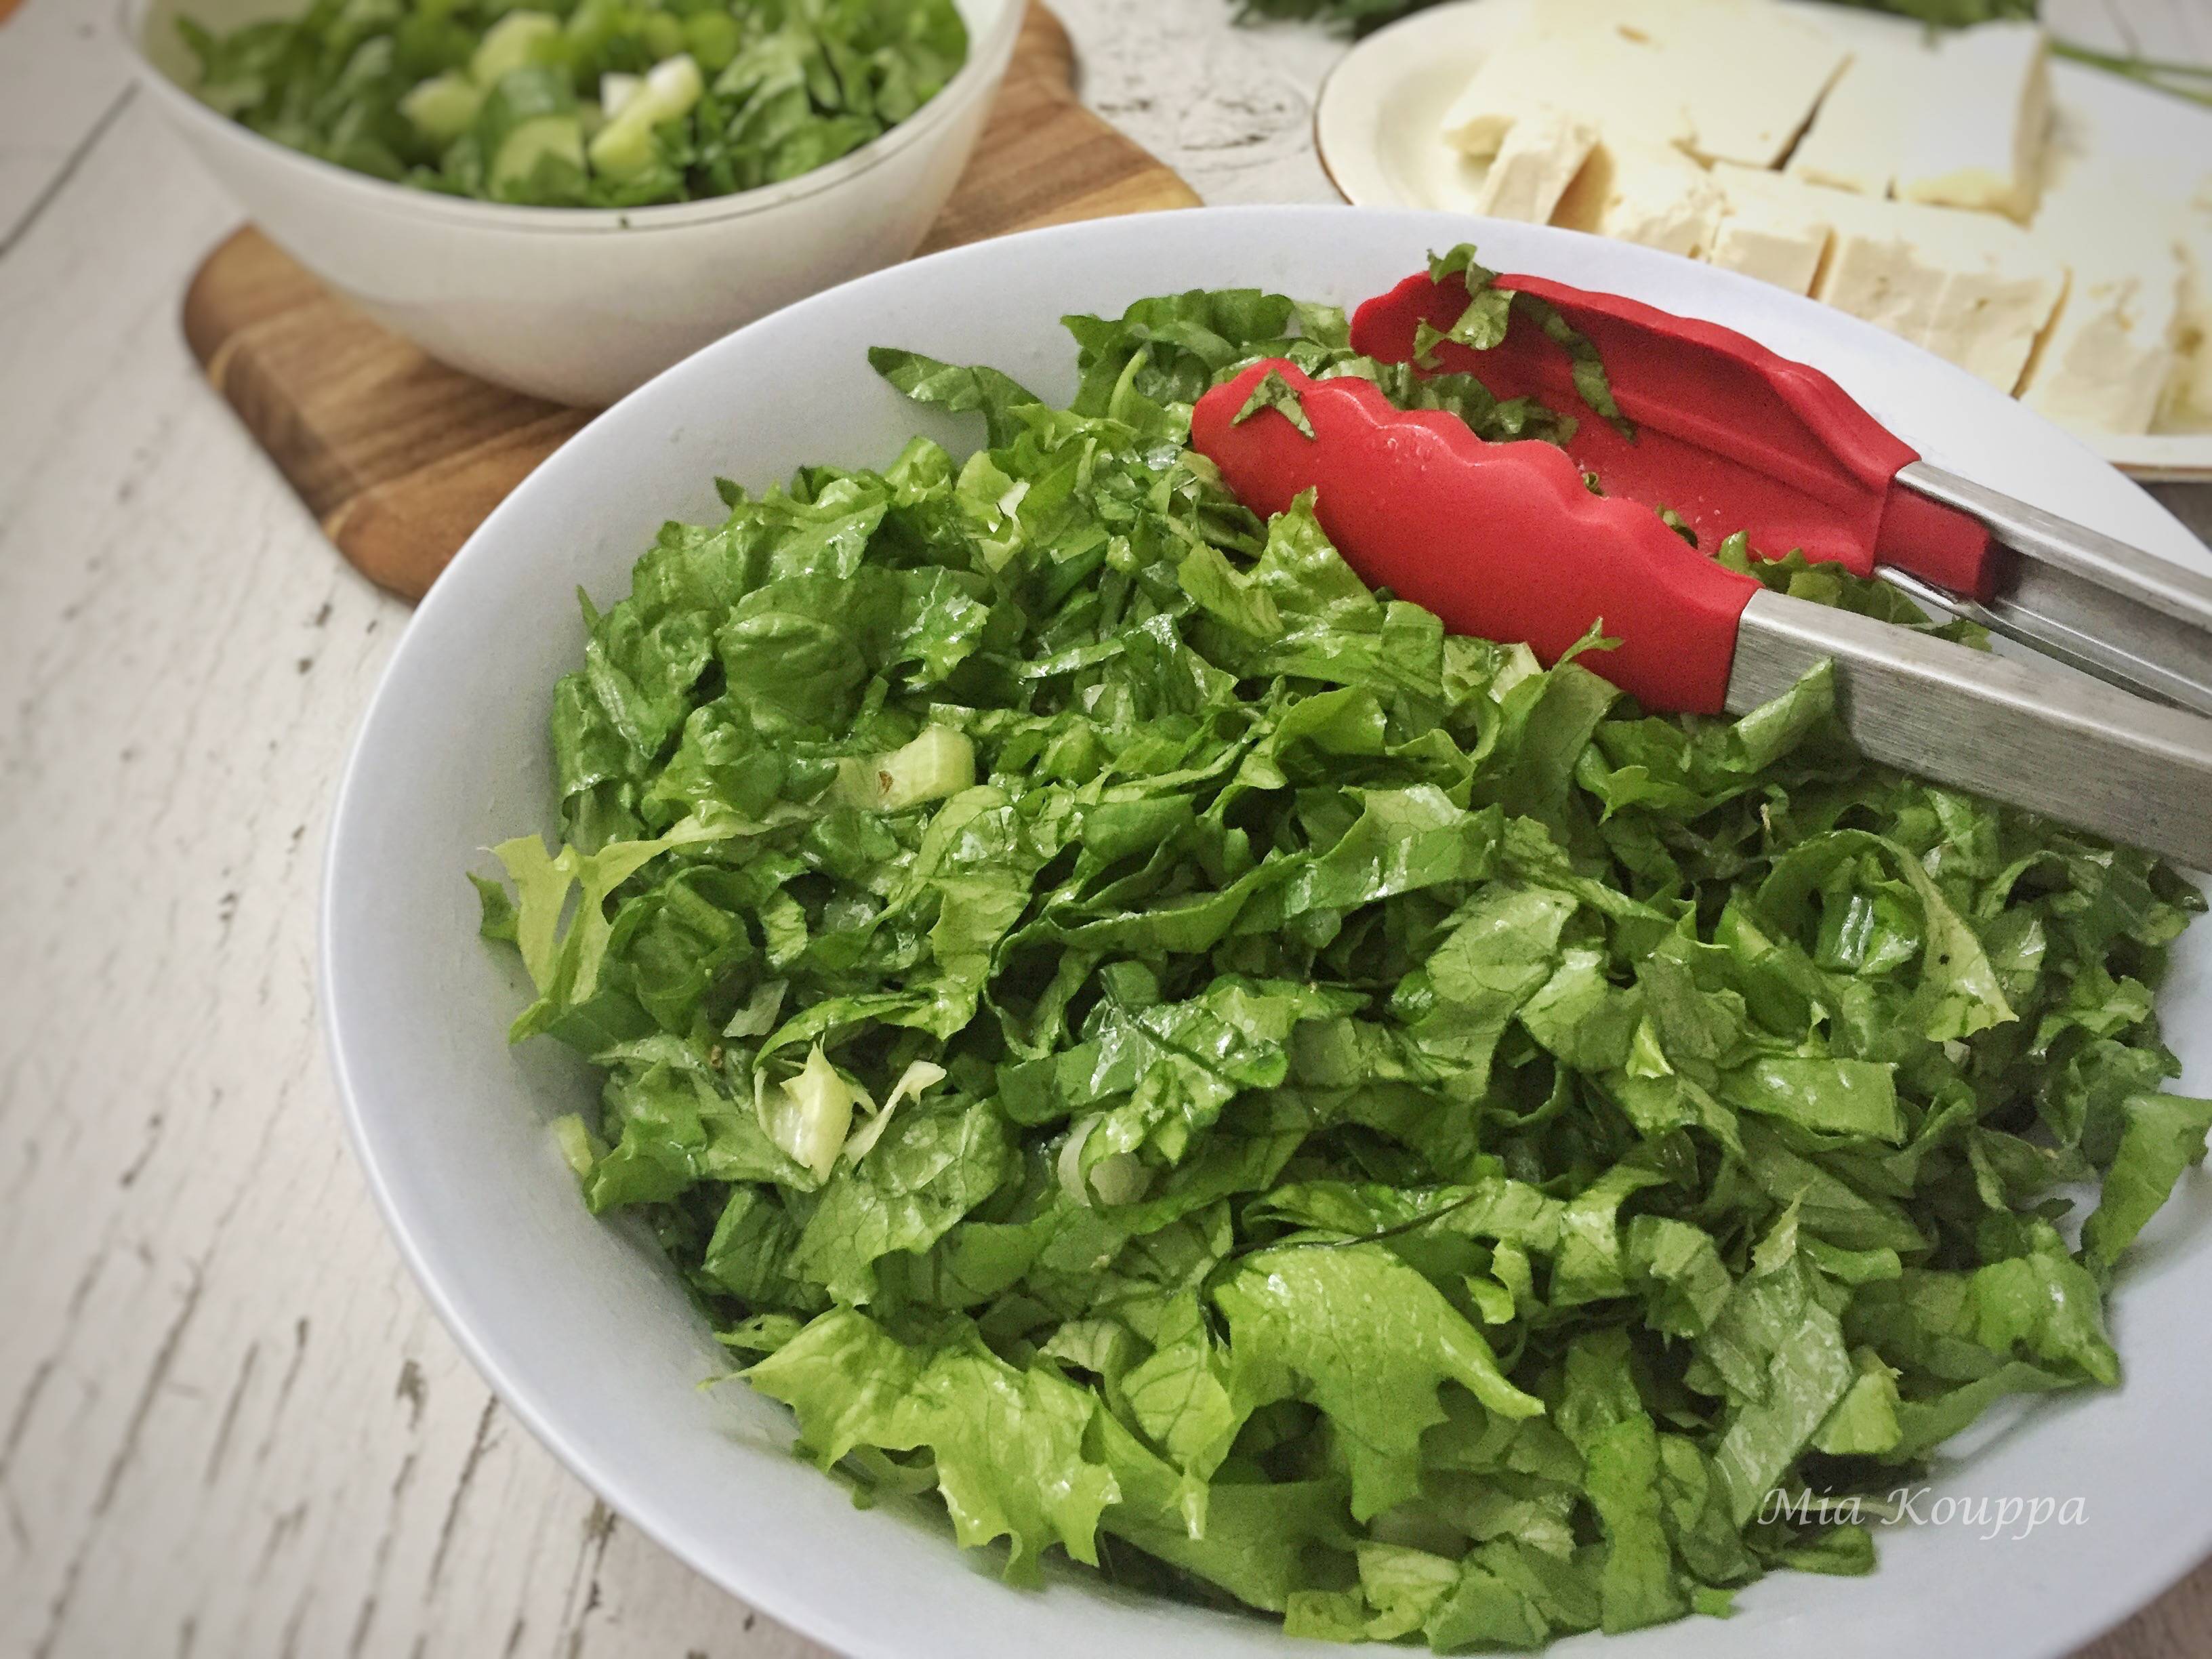 Maroulosalata, a deliciously, simple, easy lettuce salad where the lettuce is the star!